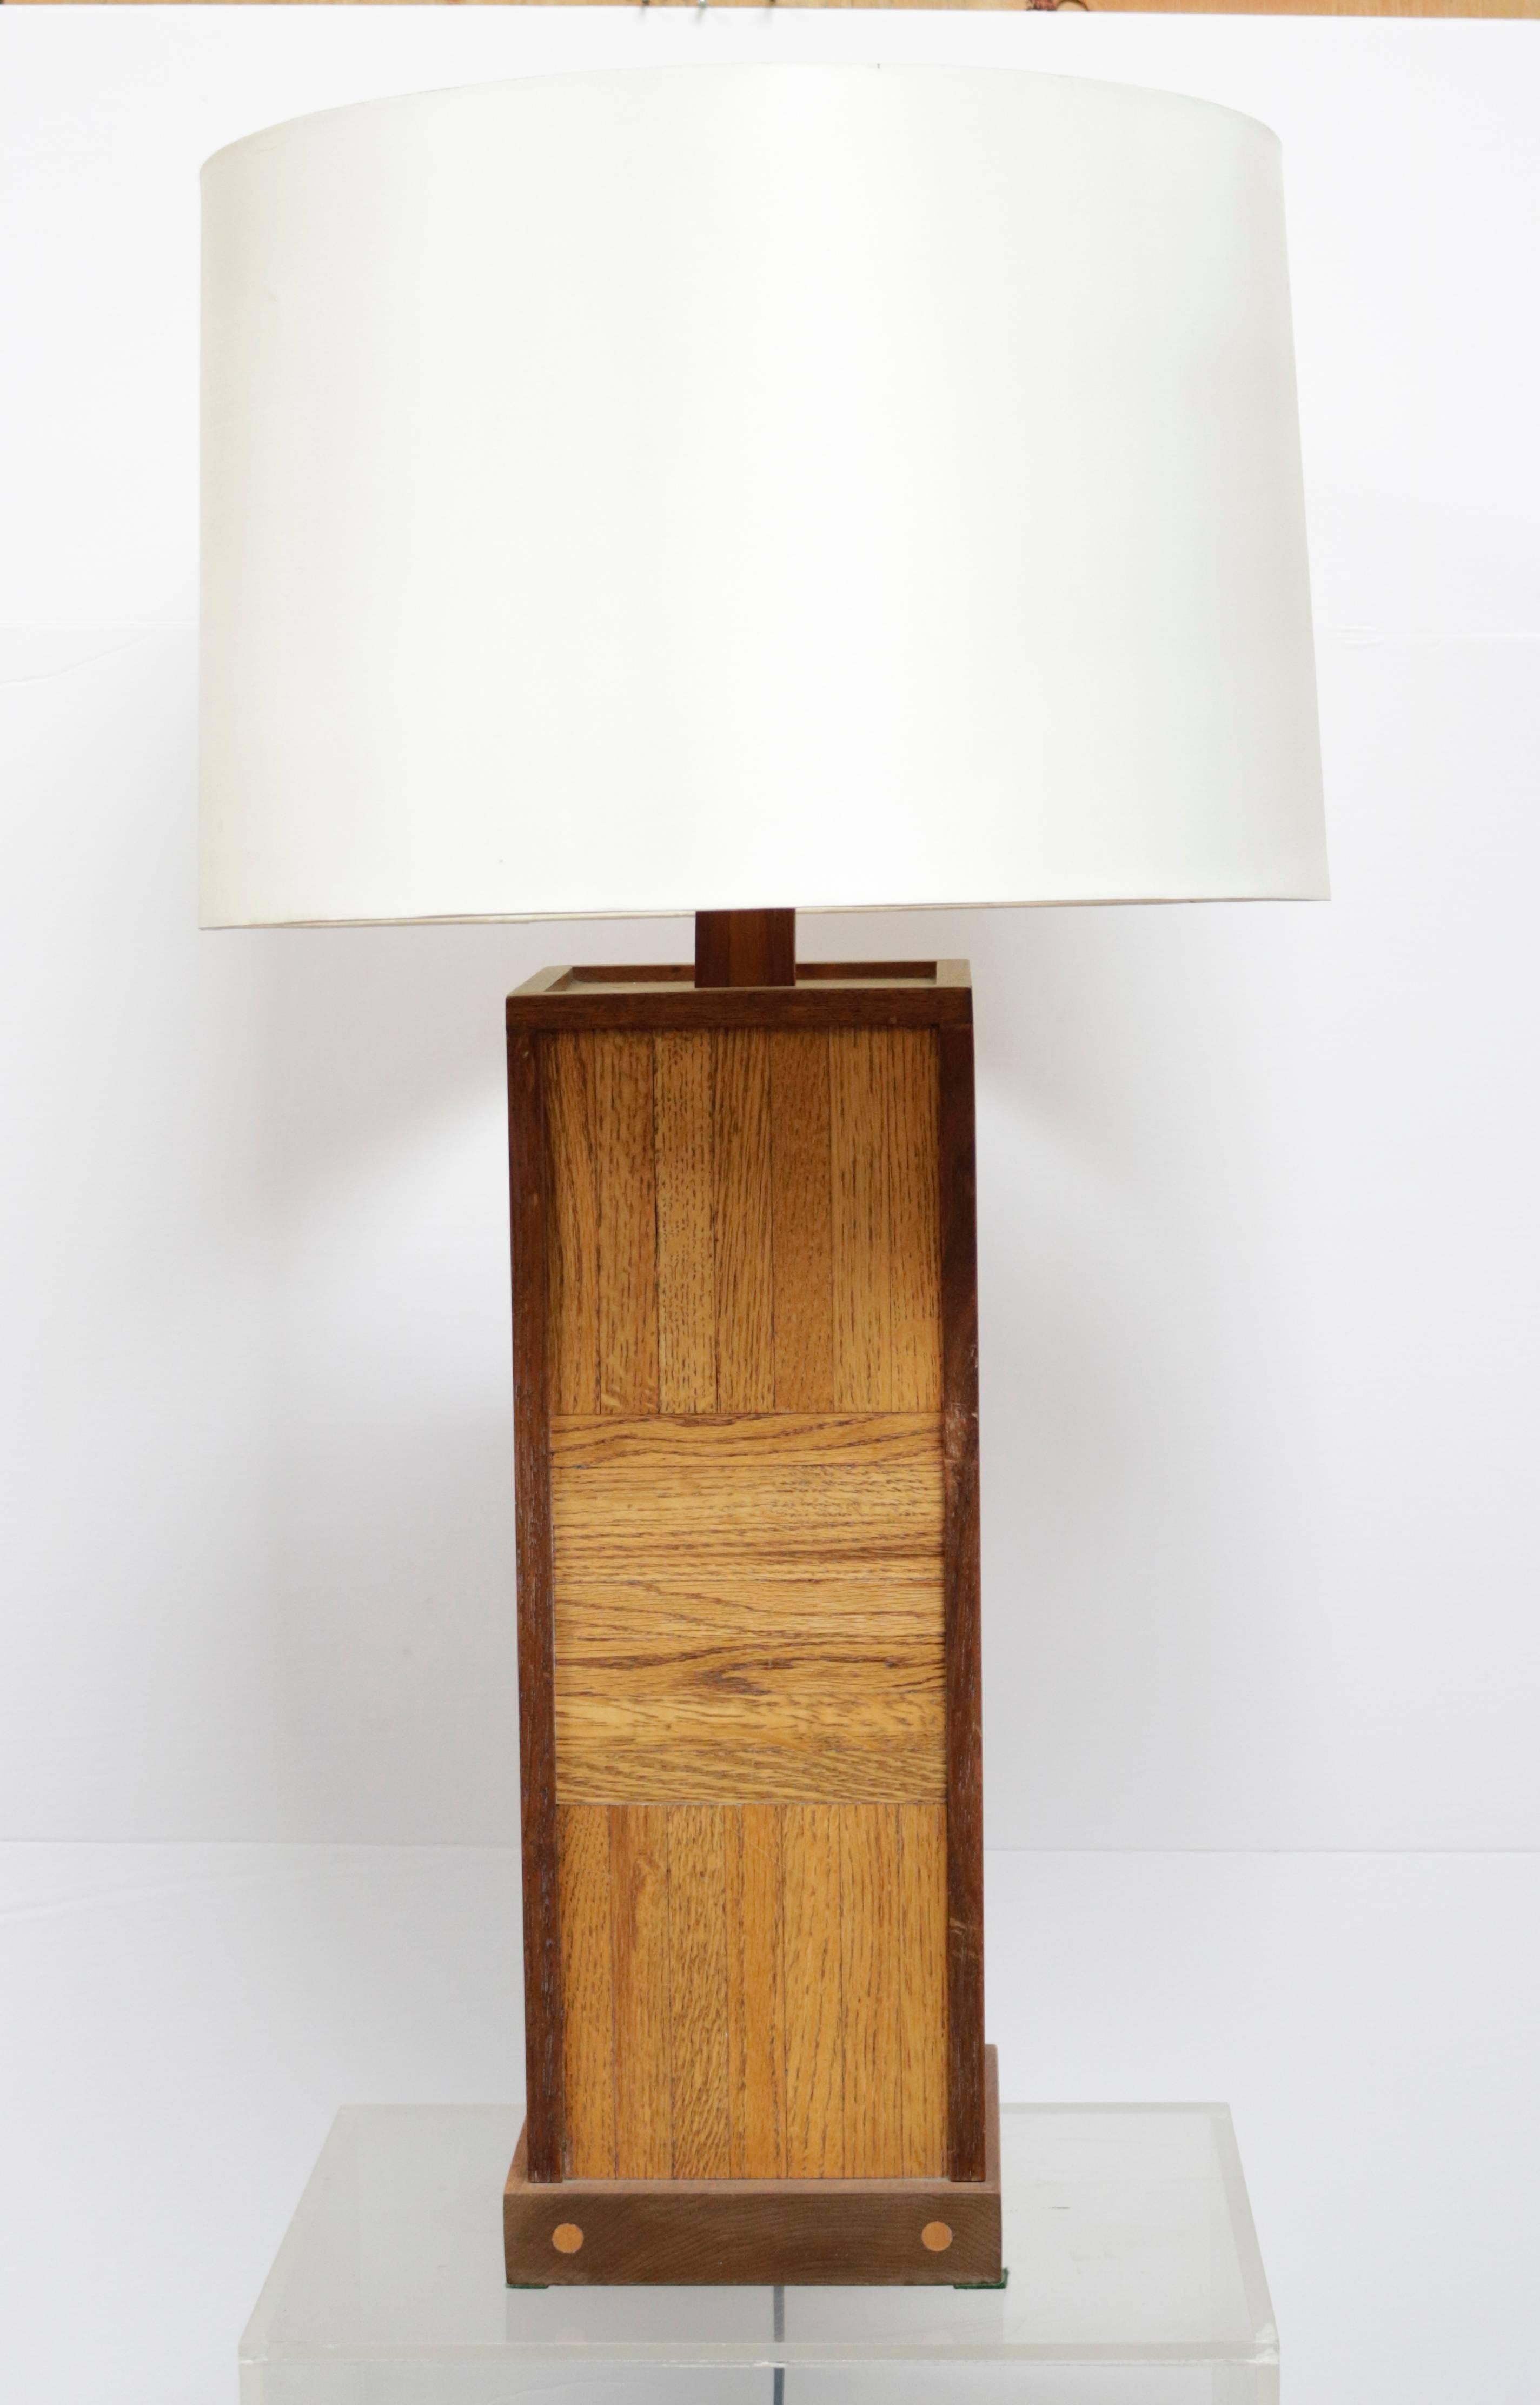 Lamp is made of parquet walnut.
It is sold without the shade.

